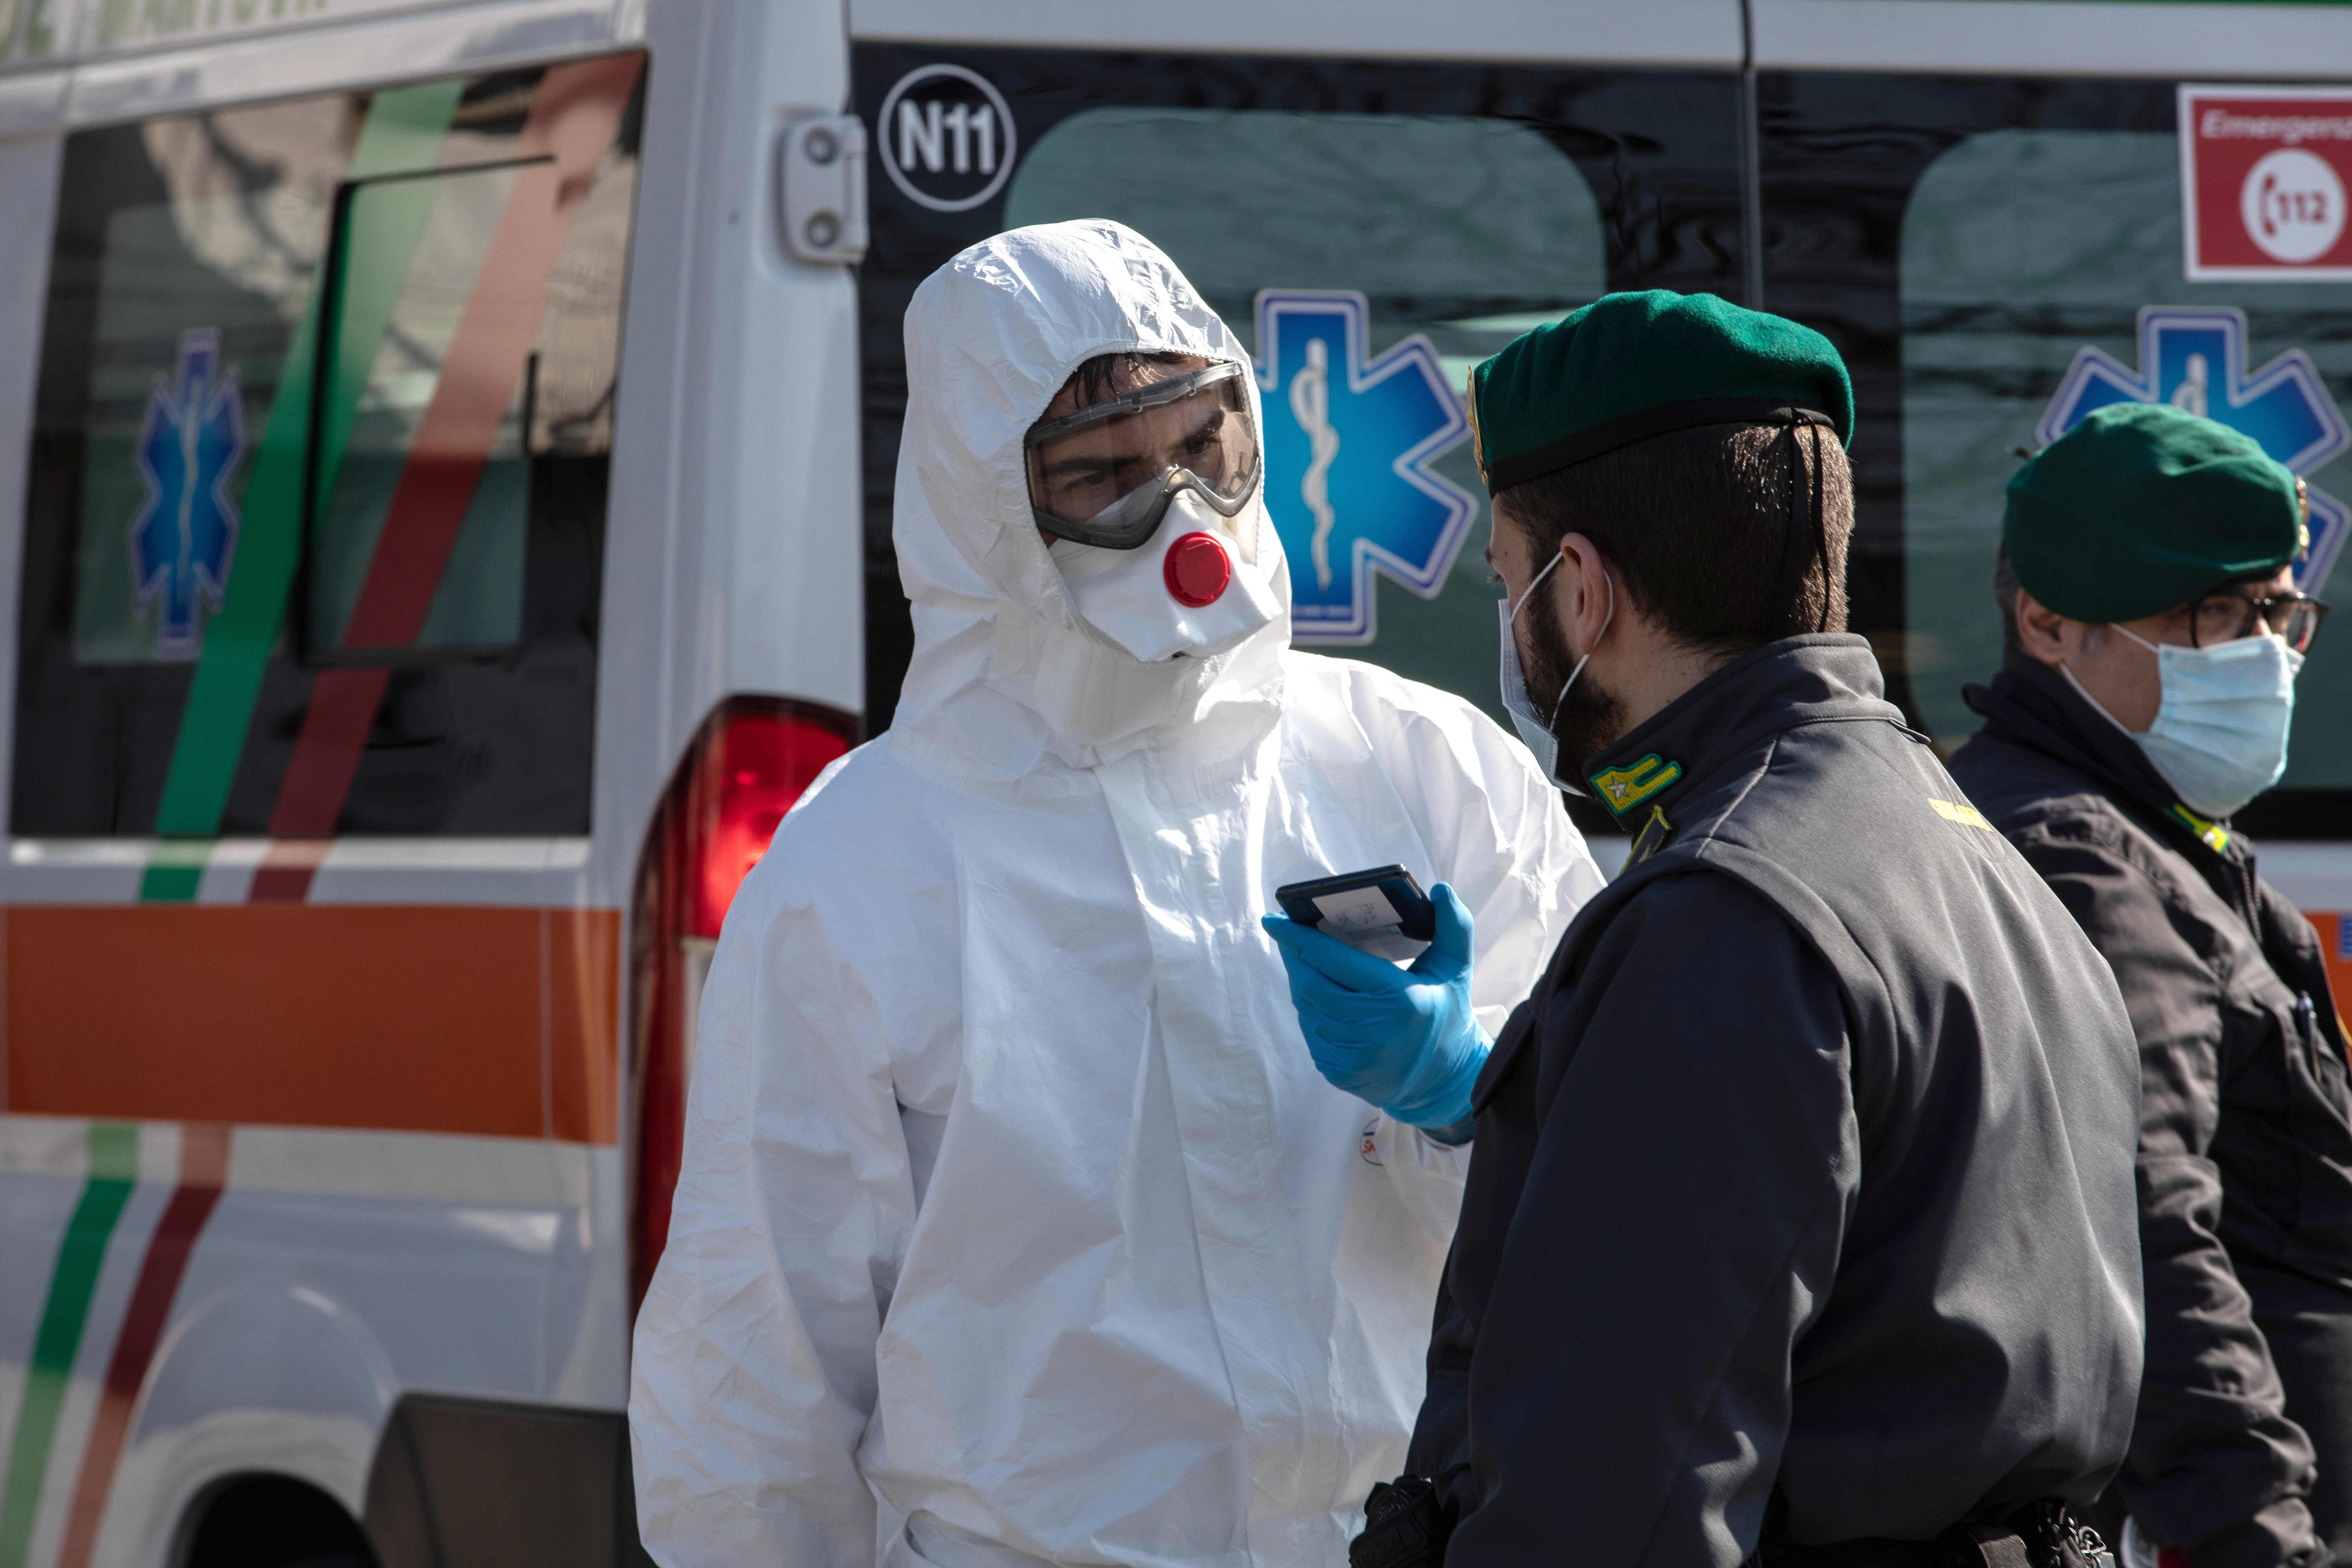 A rescue worker, wearing a protective suit, talks to an Italian Guardia di Finanza (Custom Plice) officer at a road block on February 24, 2020 in Casalpusterlengo, south-west Milan, Italy. Casalpusterlengo is one of the ten small towns placed under lockdown after coronavirus sparked infections throughout the Lombardy region.(Emanuele Cremaschi/Getty Images)